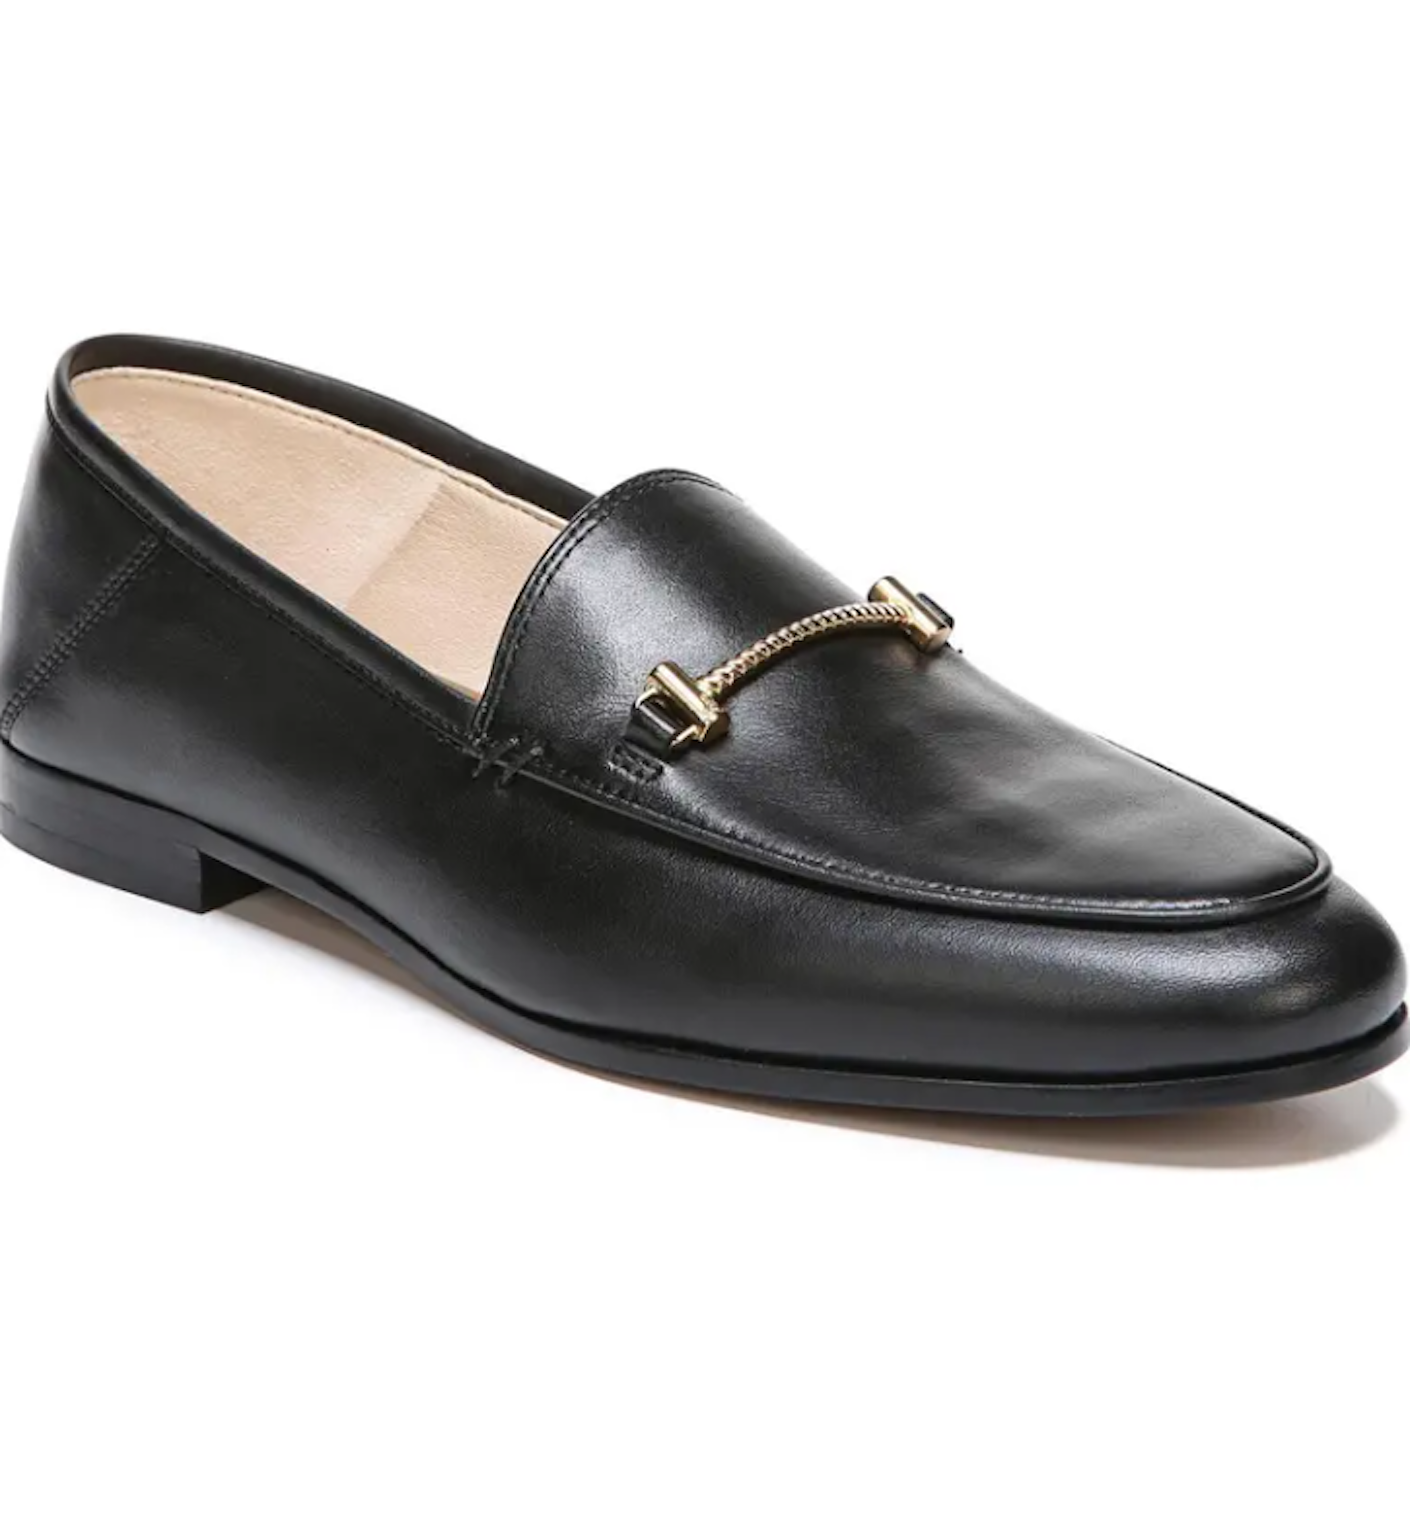 A classic black leather loafer with chain hardware detail is pictured in front of a white background.